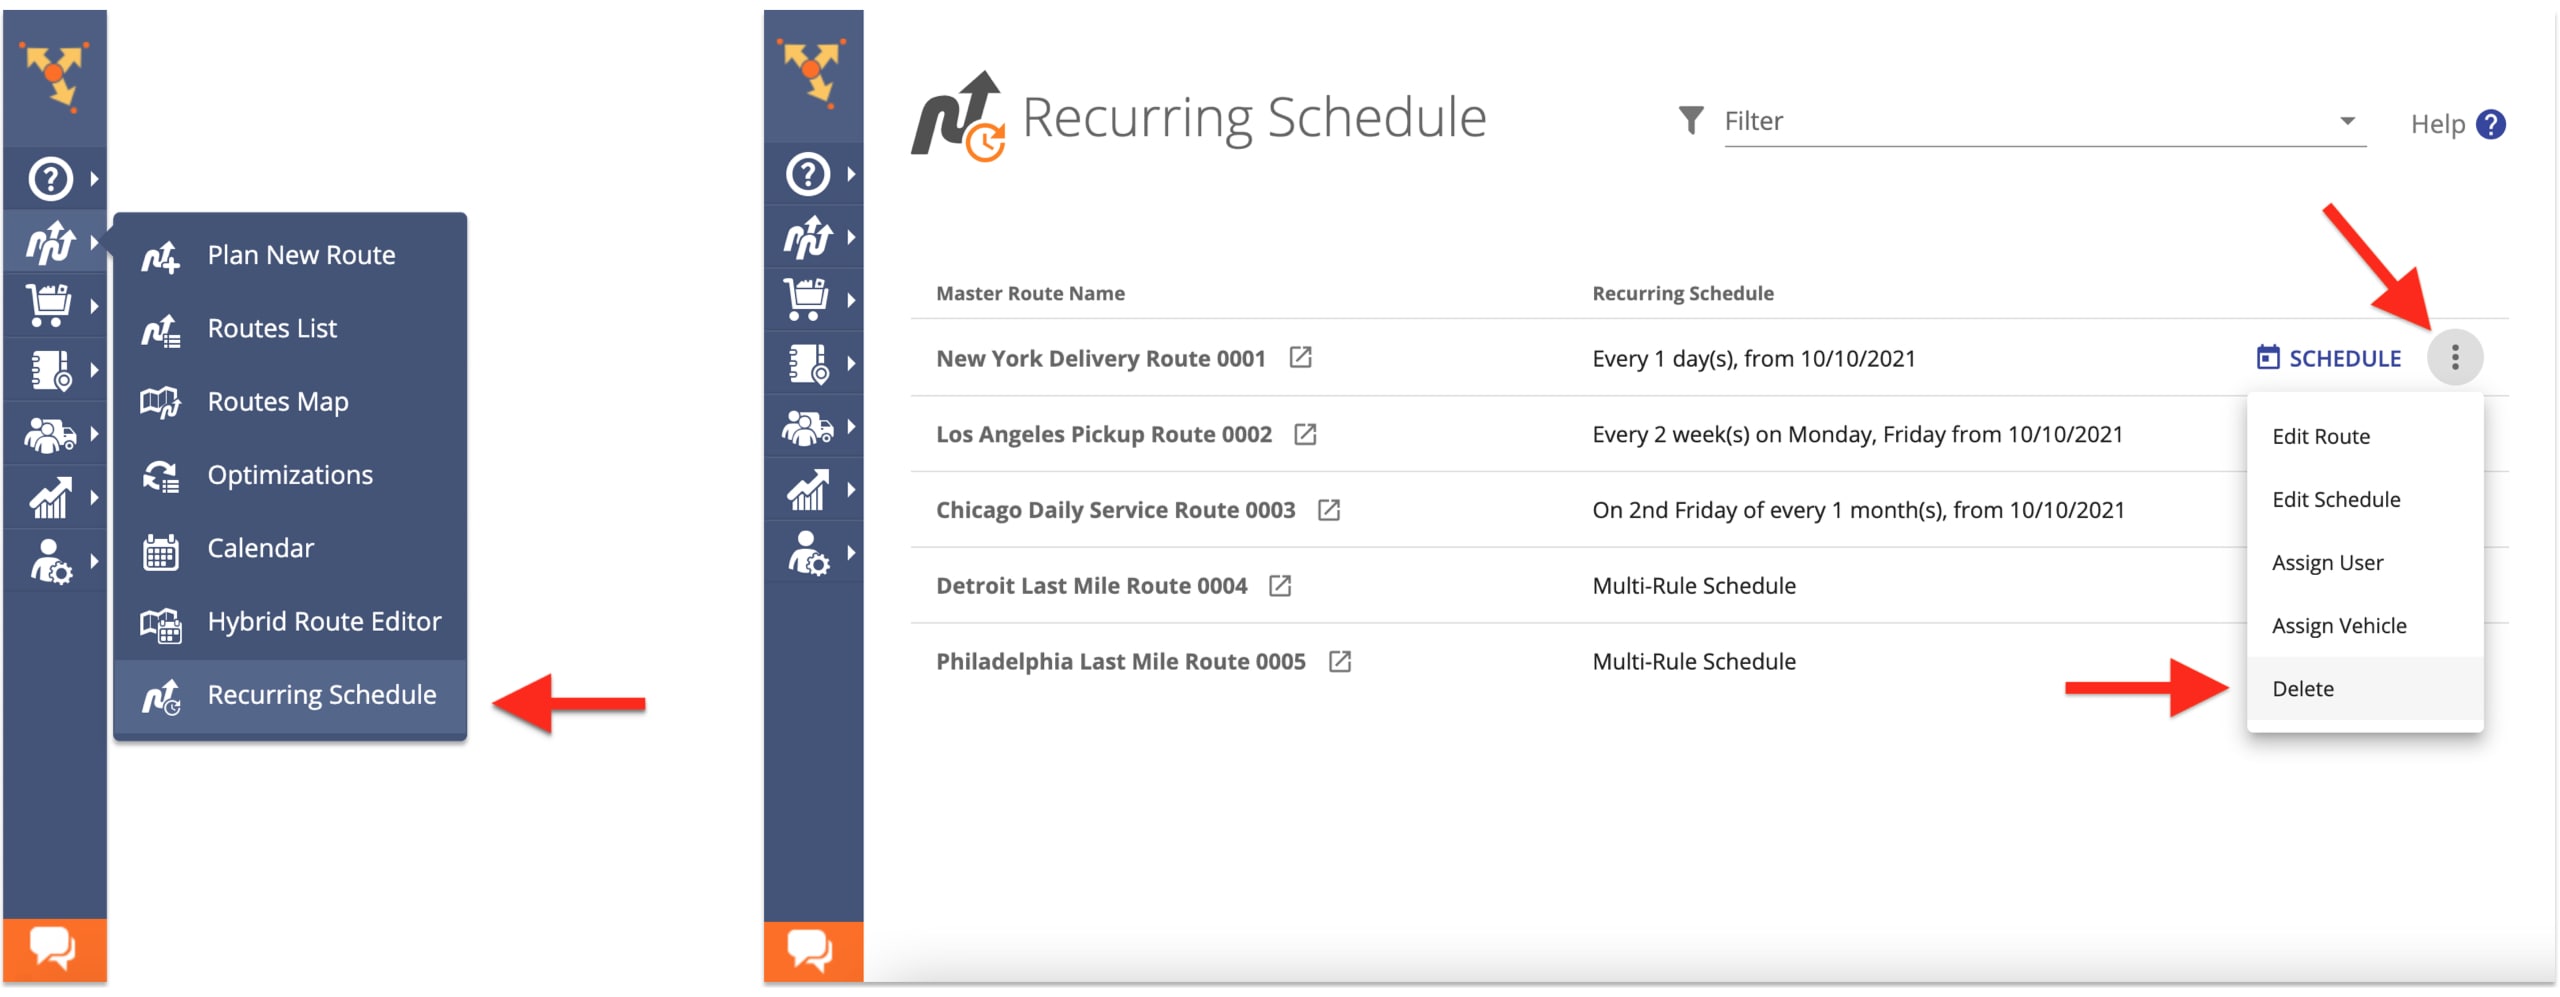 Open Recurring Schedule to manage delivery calendar & repeat routes on route planning software.